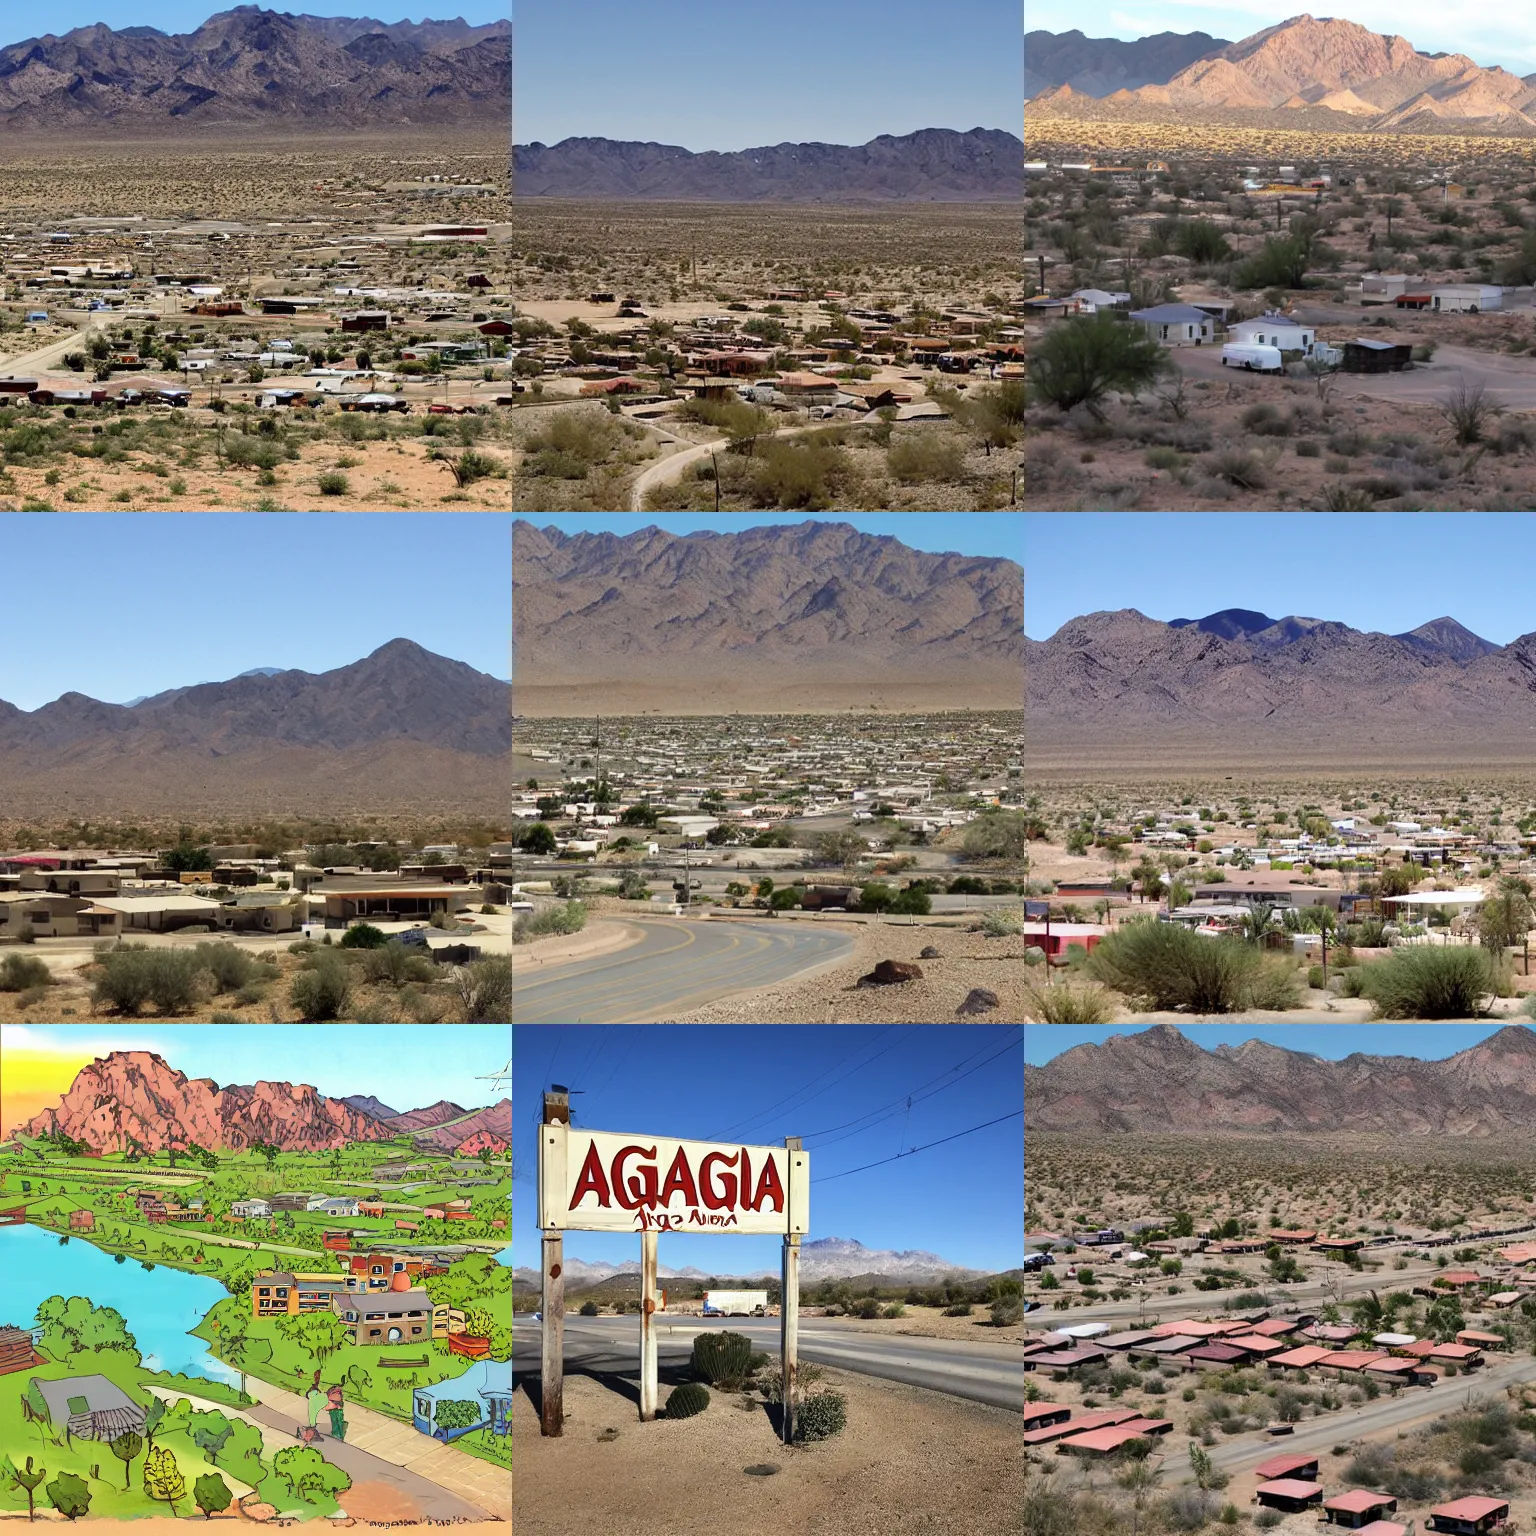 Prompt: The town of Agua Fria